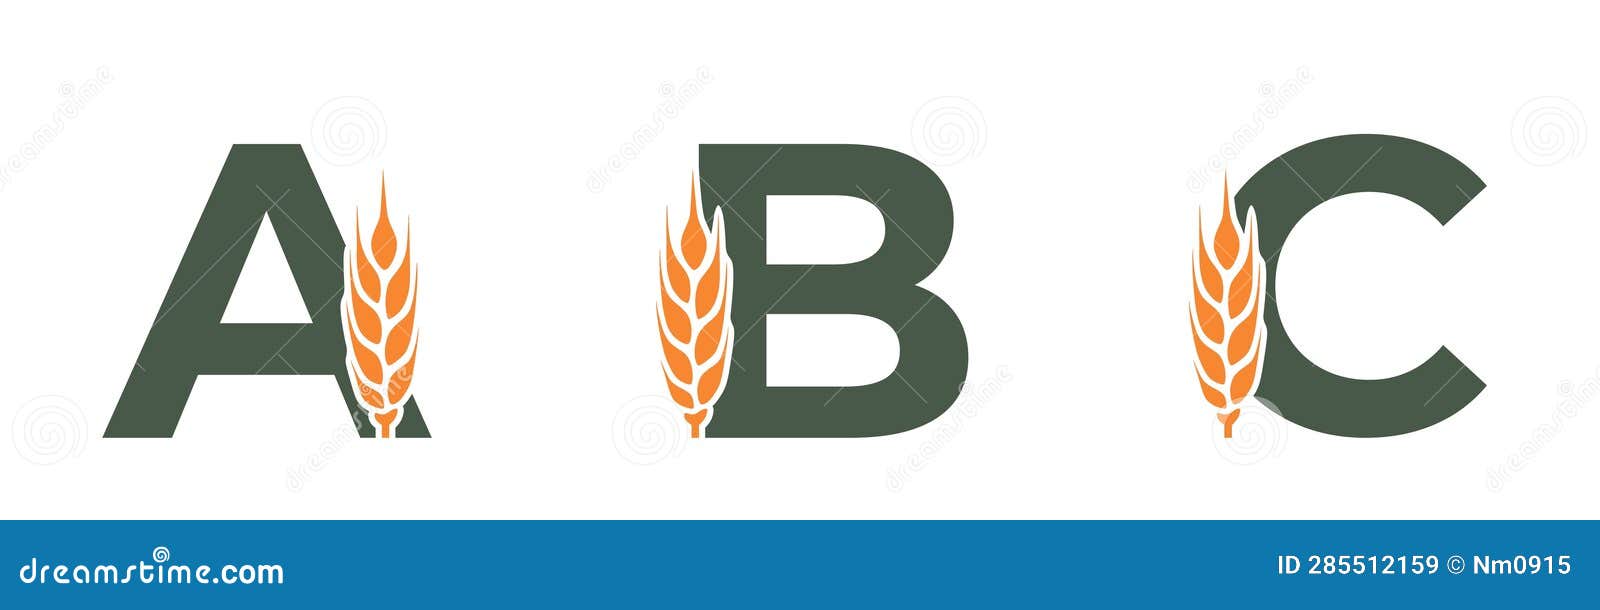 A B C Capital Letters with Wheat Ear. Harvest Alphabet Design. Cereal ...